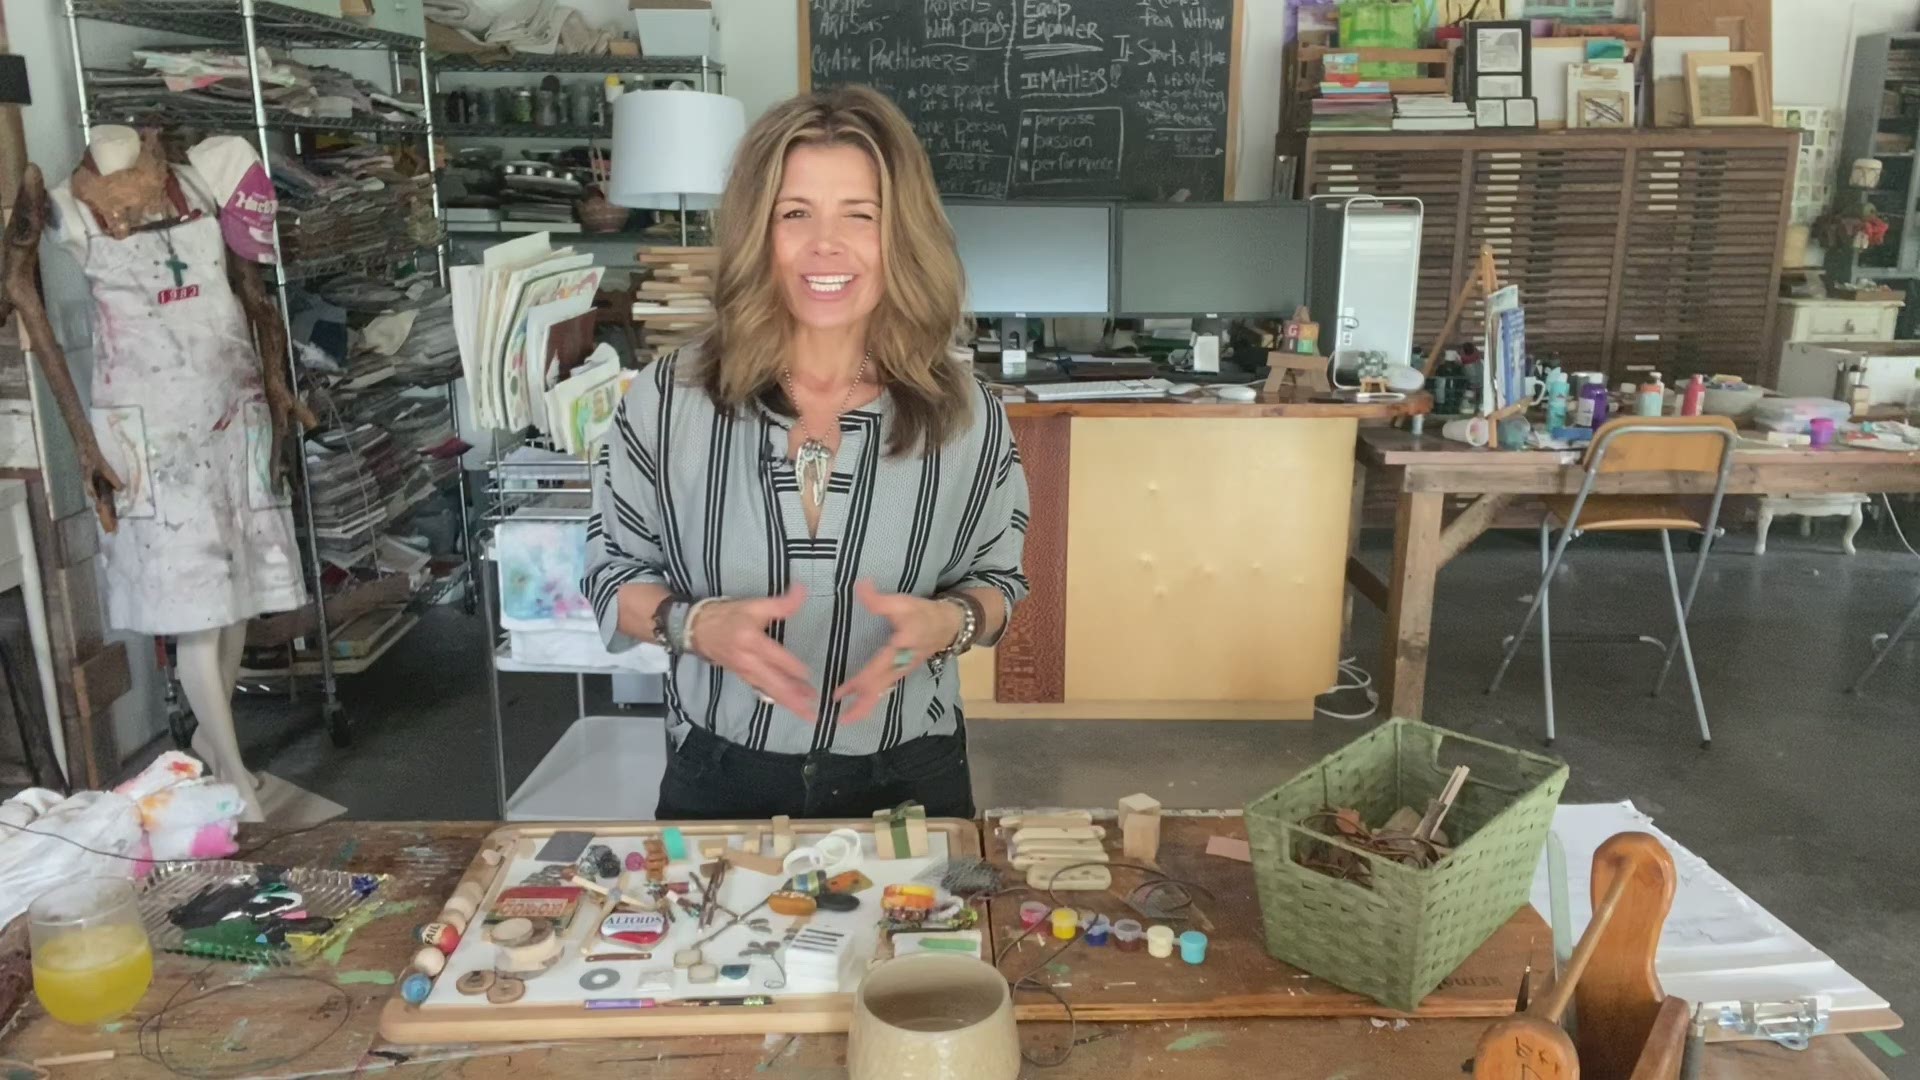 'Iowa Live' co-host Michele Brown shares more about Gratitude Bowls.